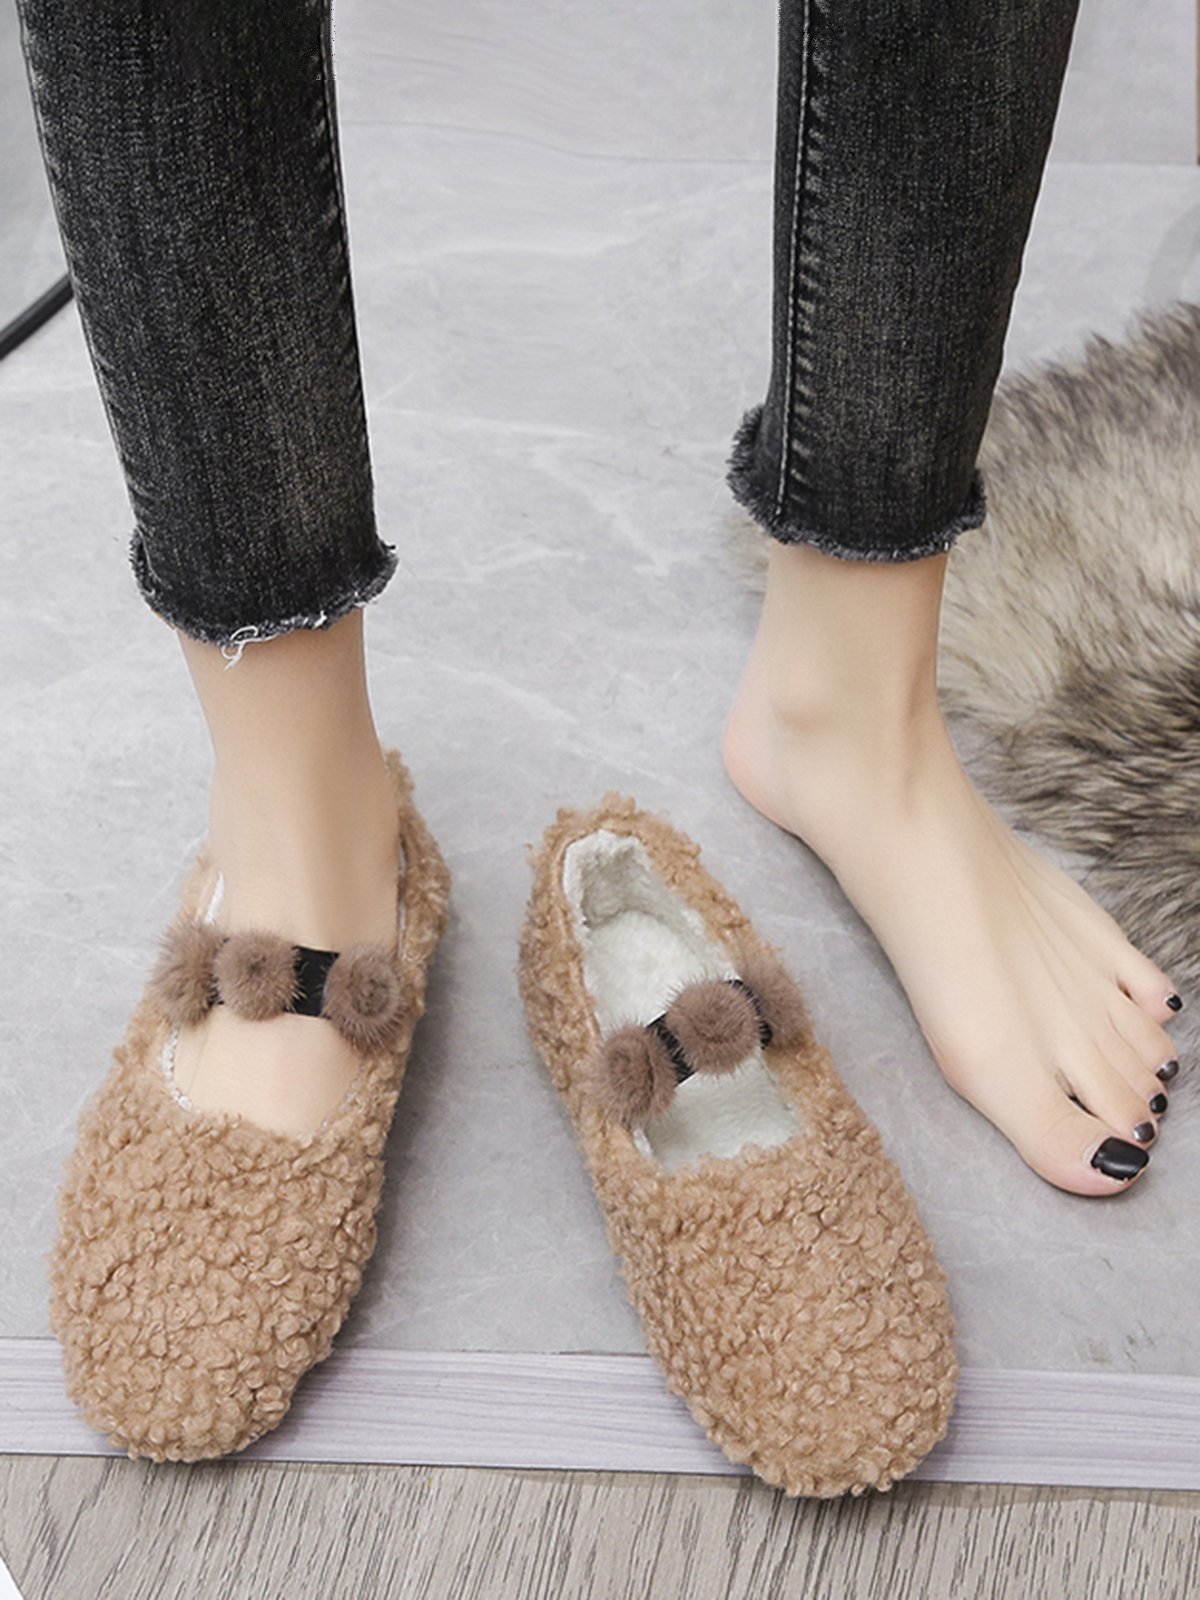 Spring Flats/loafers